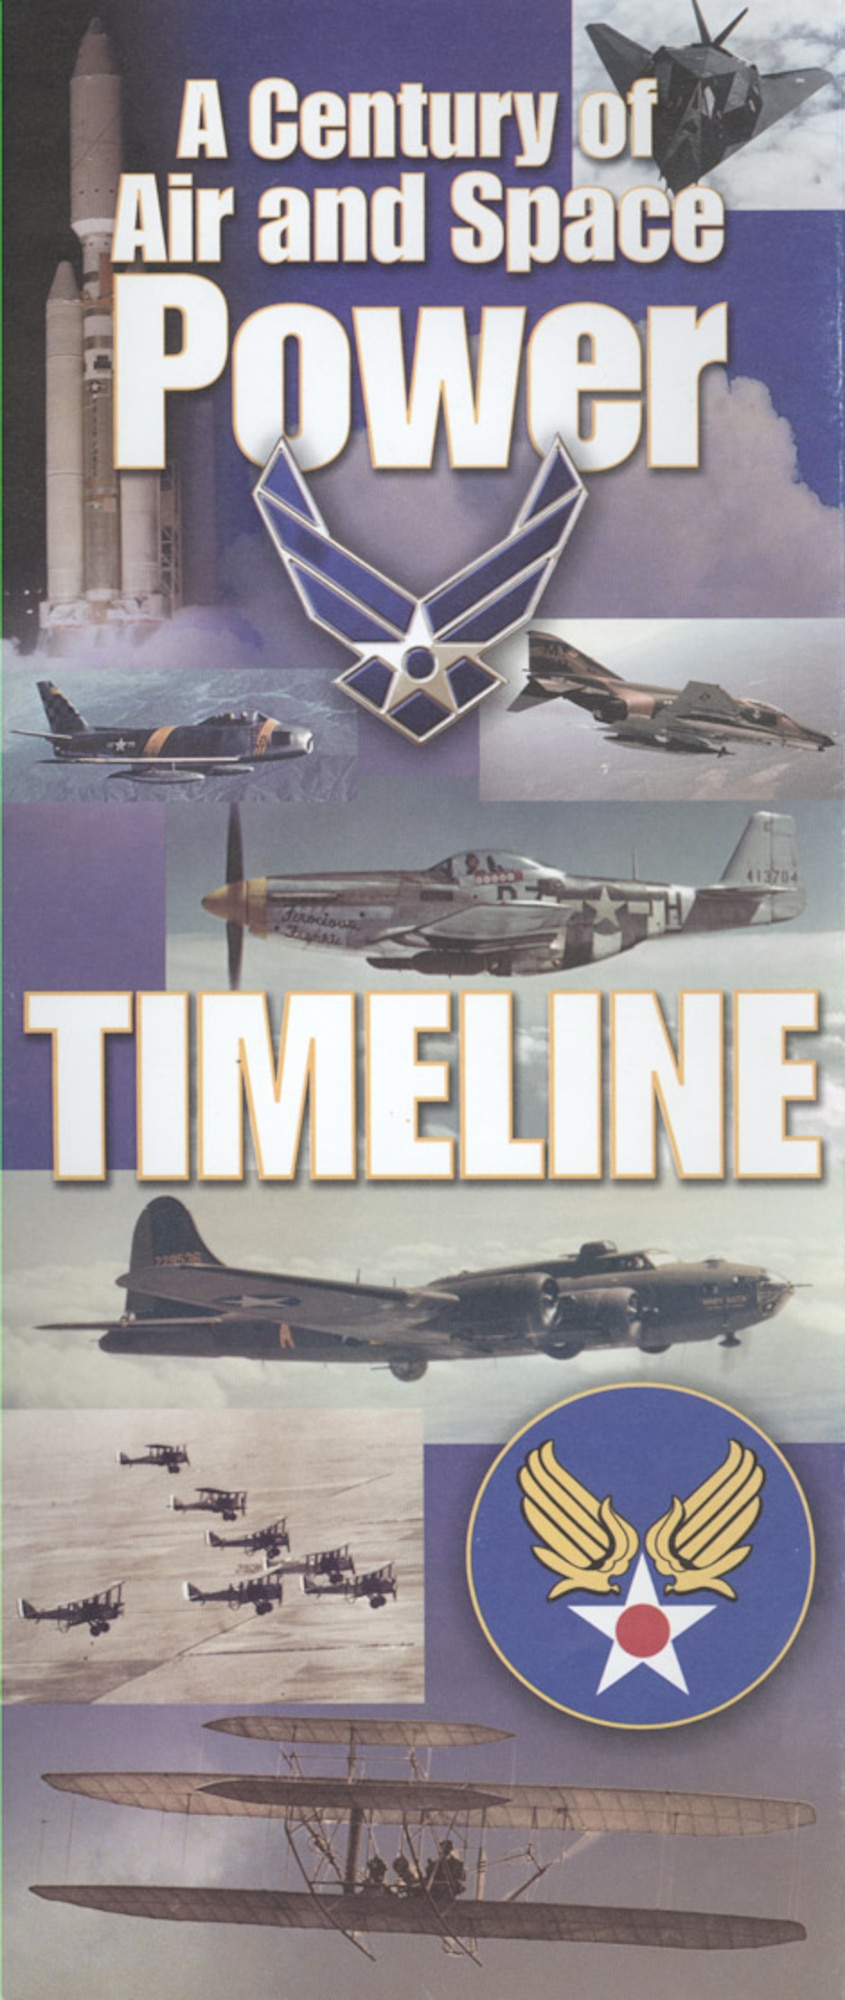 A Graphical representation of the aerospace events, wars, aircraft, etc. through time to 2002 